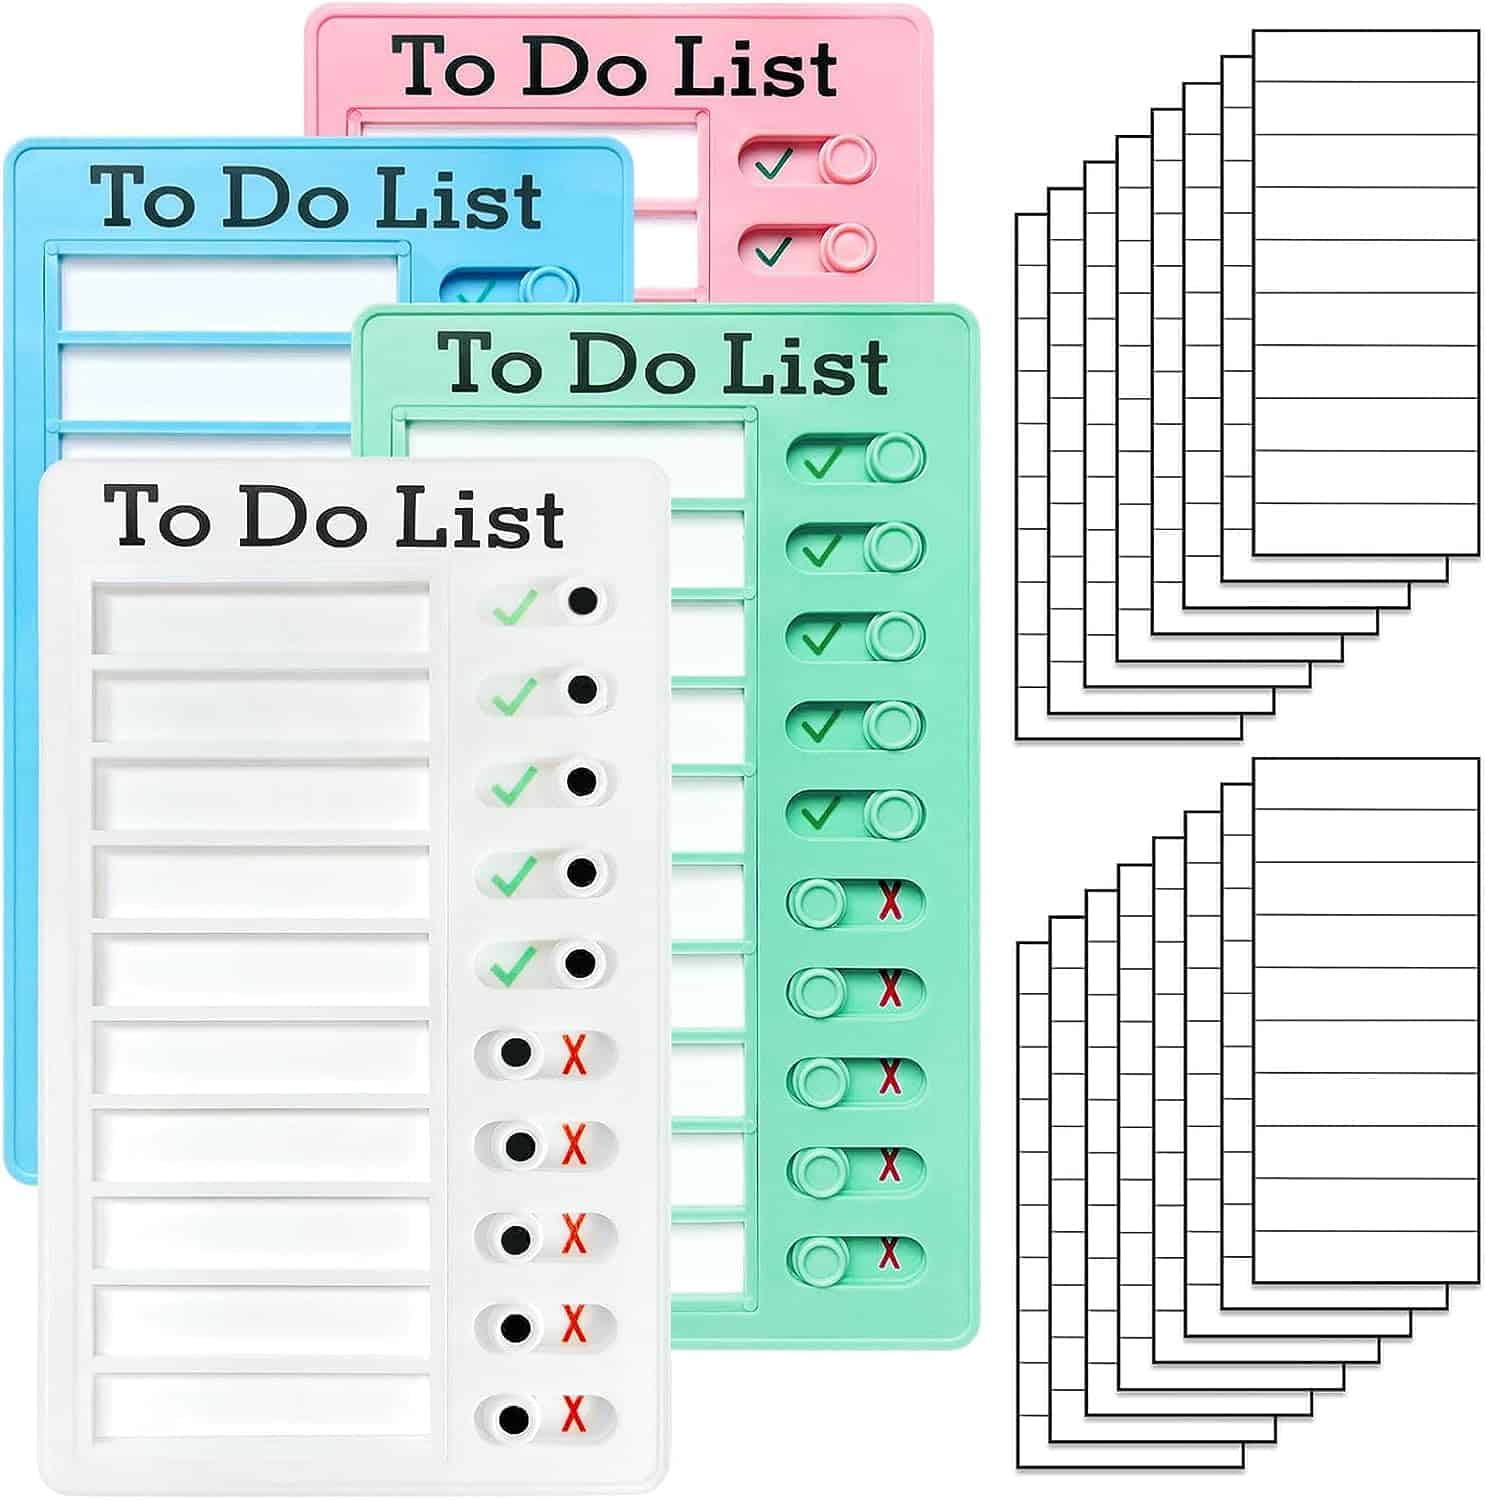 To Do List with Completion Sliders